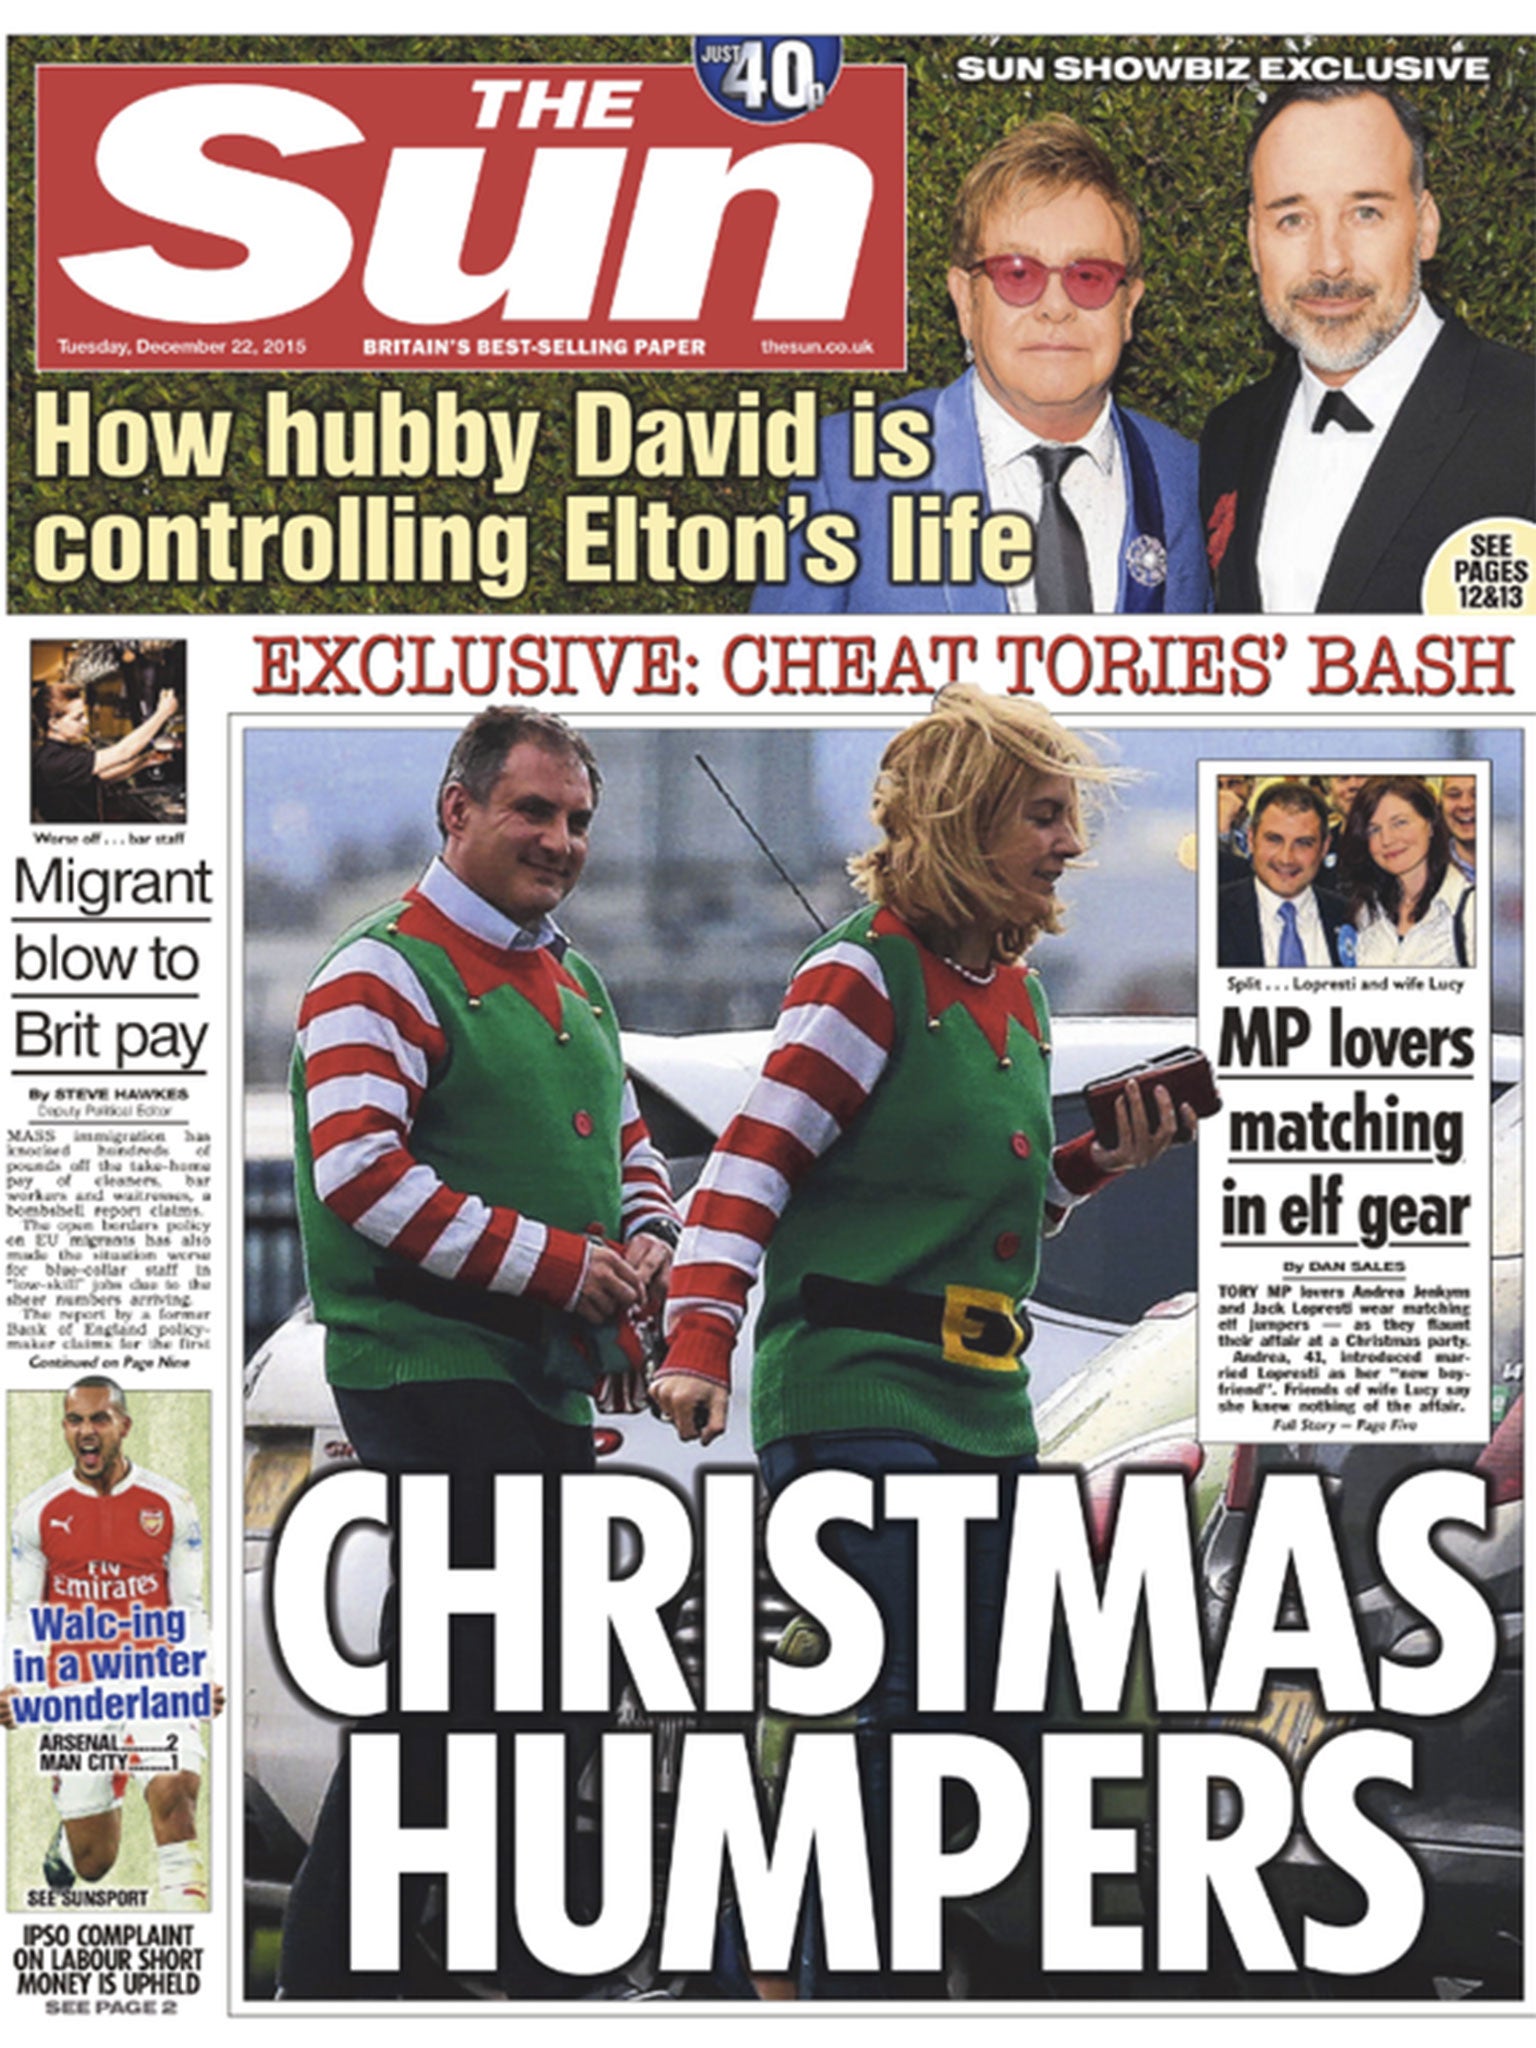 The Sun's front page correction appeared in the bottom left corner on 22 December.